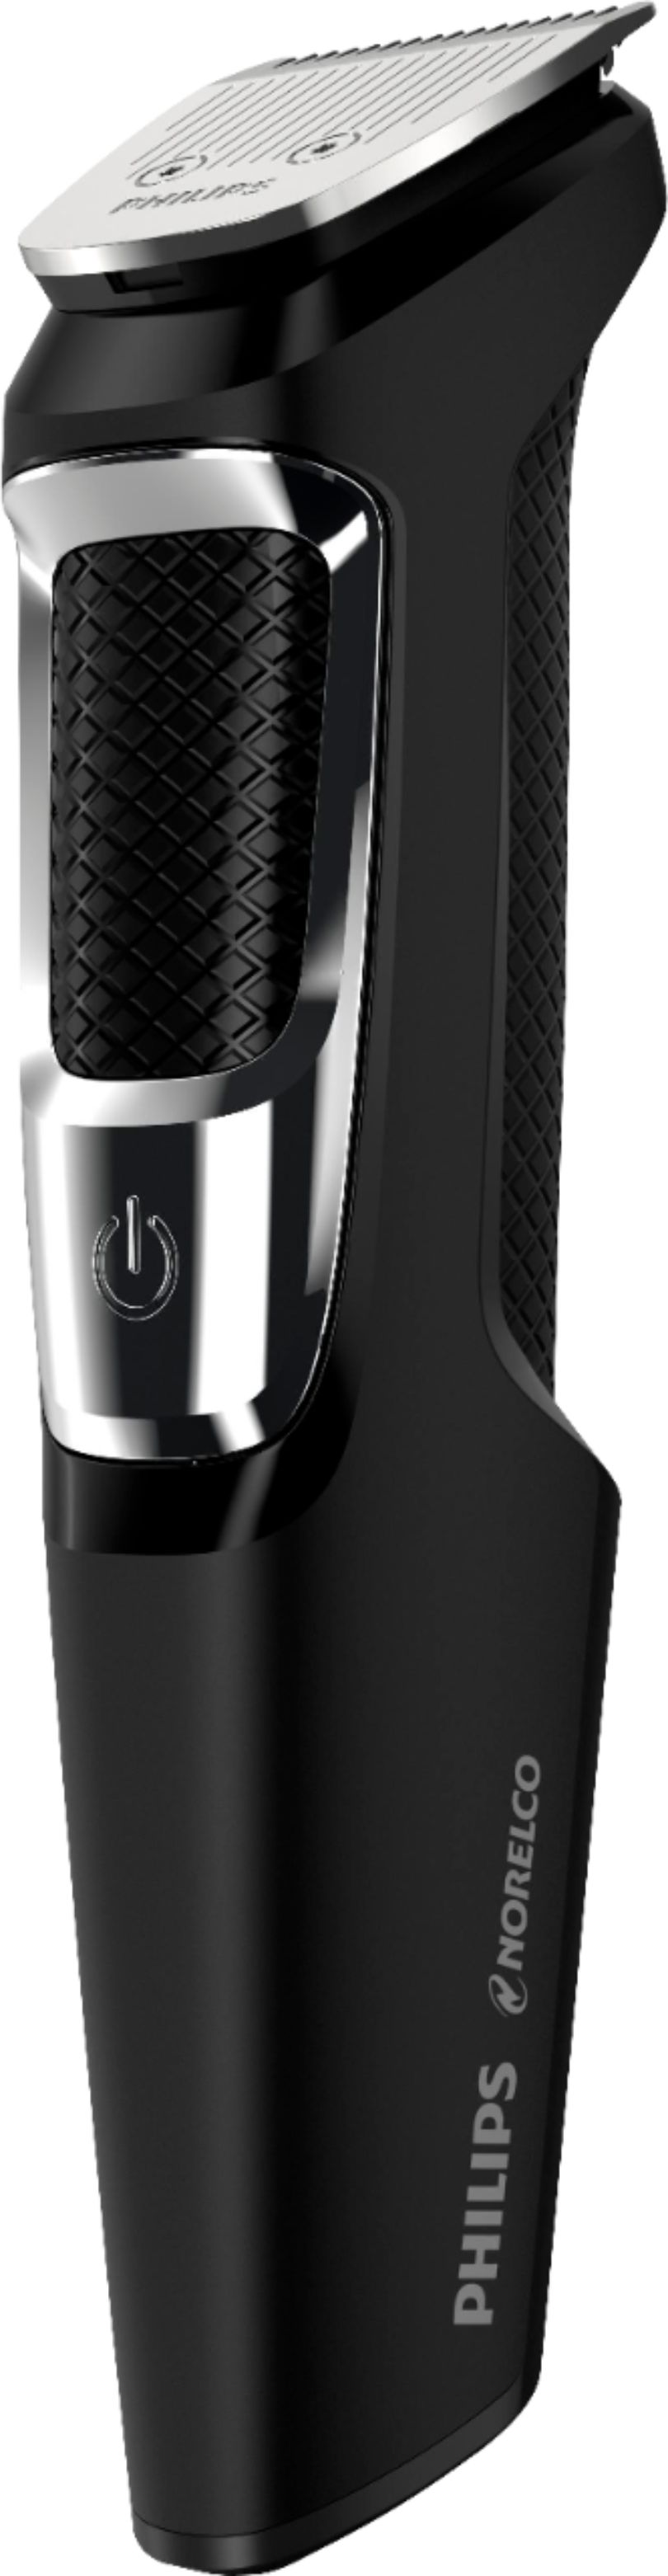 Philips Norelco Multigroom 3000 Beard, Moustache, Ear and Nose Trimmer  Black/silver MG3750/60 - Best Buy